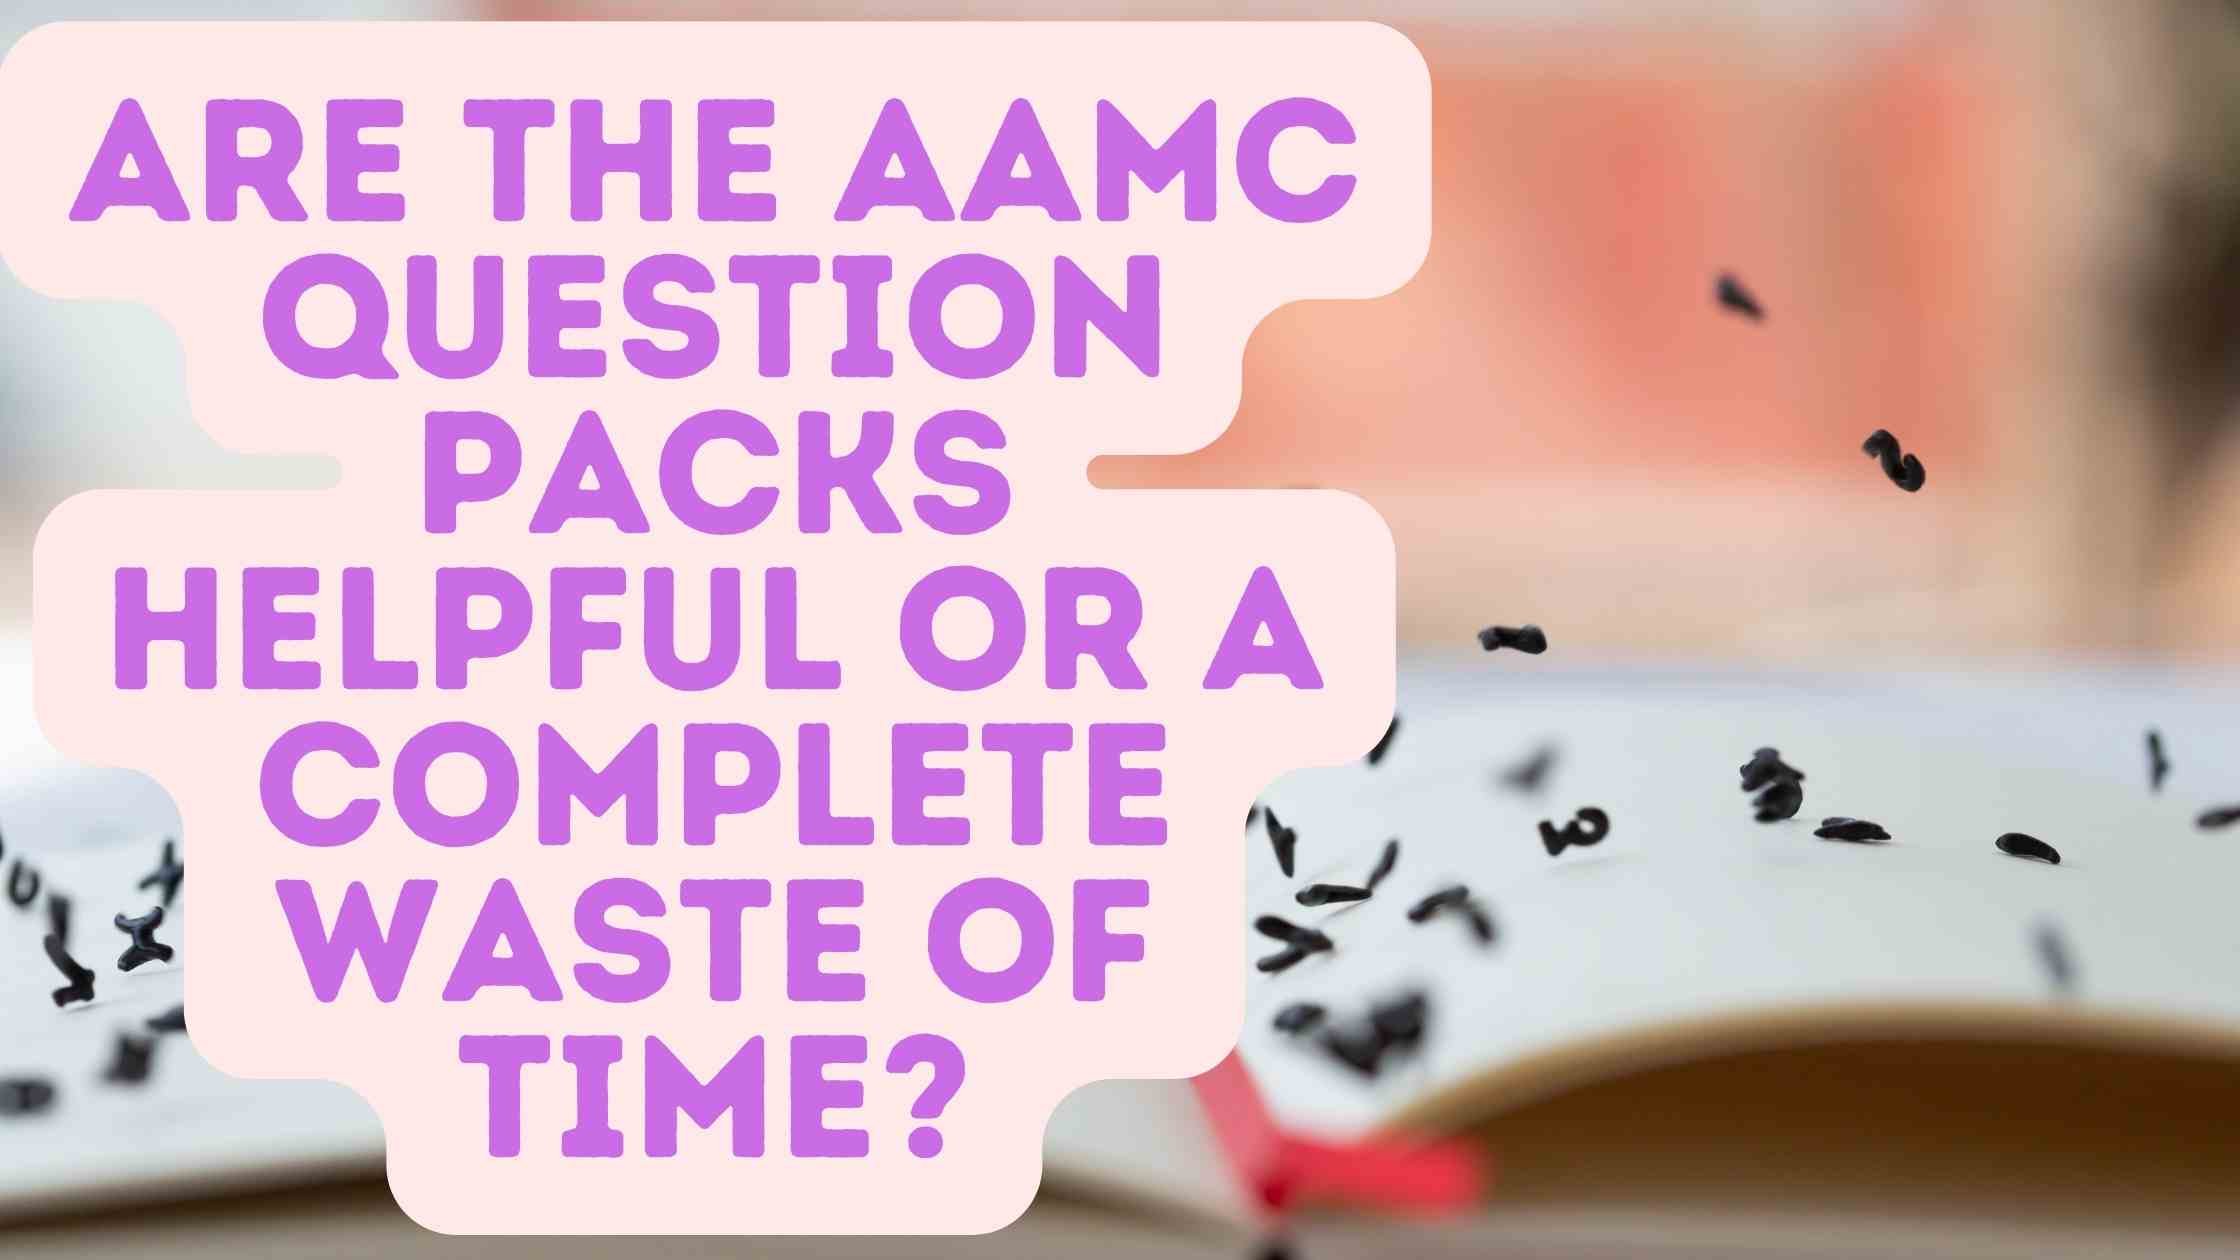 Are The AAMC Question Packs Helpful Or A Complete Waste Of Time?